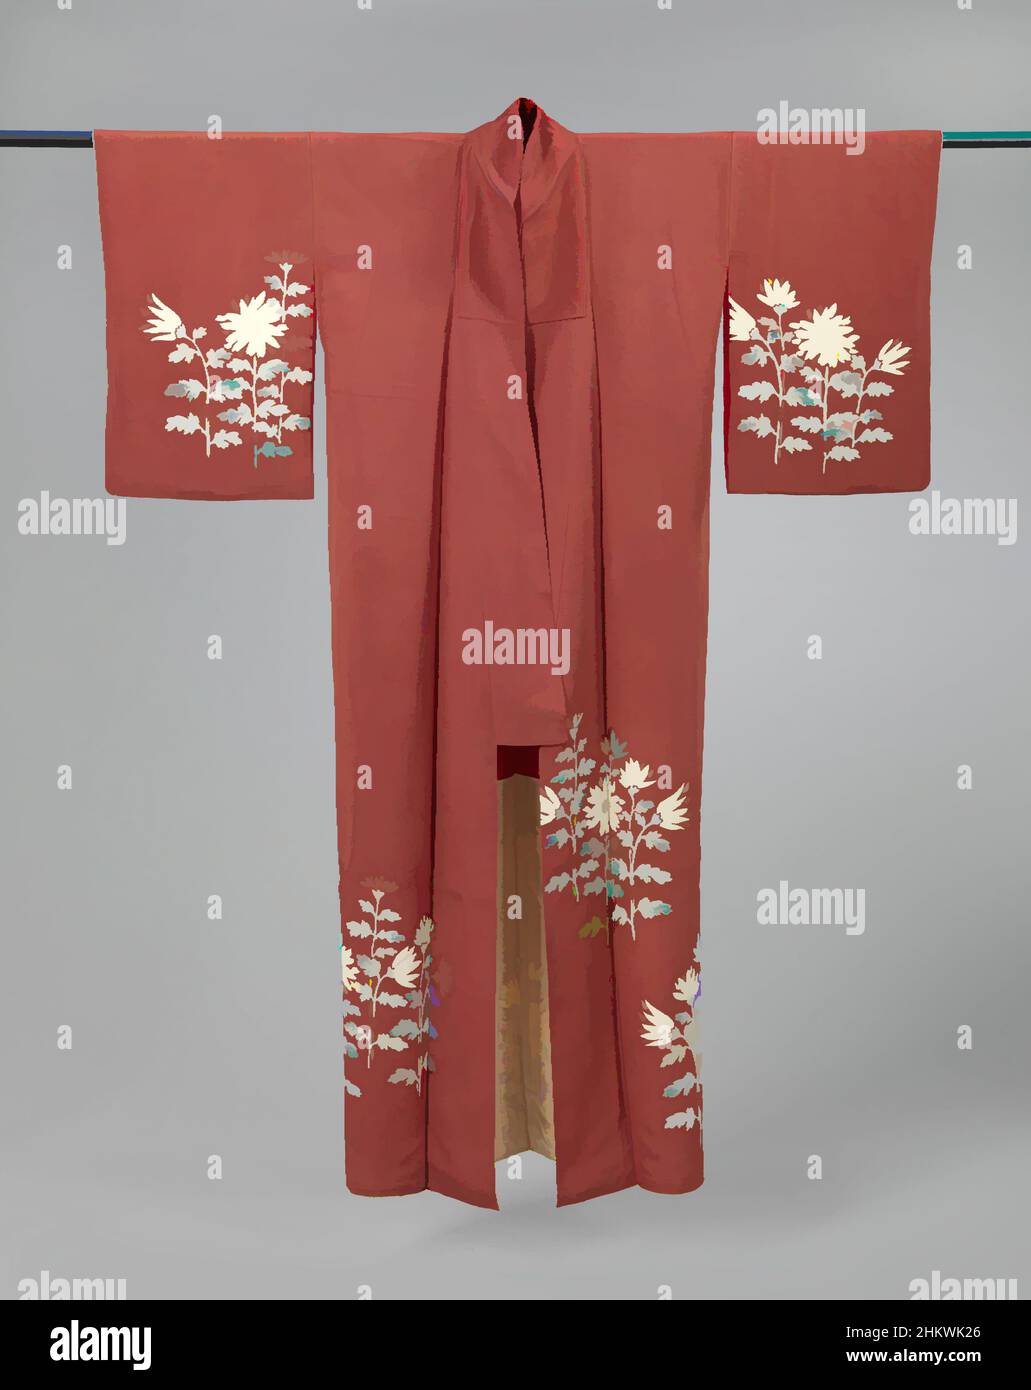 Art inspired by Women's kimono decorated with chrysanthemums, Tsukesage with chrysanthemums, Semi-formal women's kimono (tsukesage), with a decoration on the sleeves and bottom edge of chrysanthemums. Fine red crepe silk (kinsha) with a painted yuzen decoration in white and green, with, Classic works modernized by Artotop with a splash of modernity. Shapes, color and value, eye-catching visual impact on art. Emotions through freedom of artworks in a contemporary way. A timeless message pursuing a wildly creative new direction. Artists turning to the digital medium and creating the Artotop NFT Stock Photo